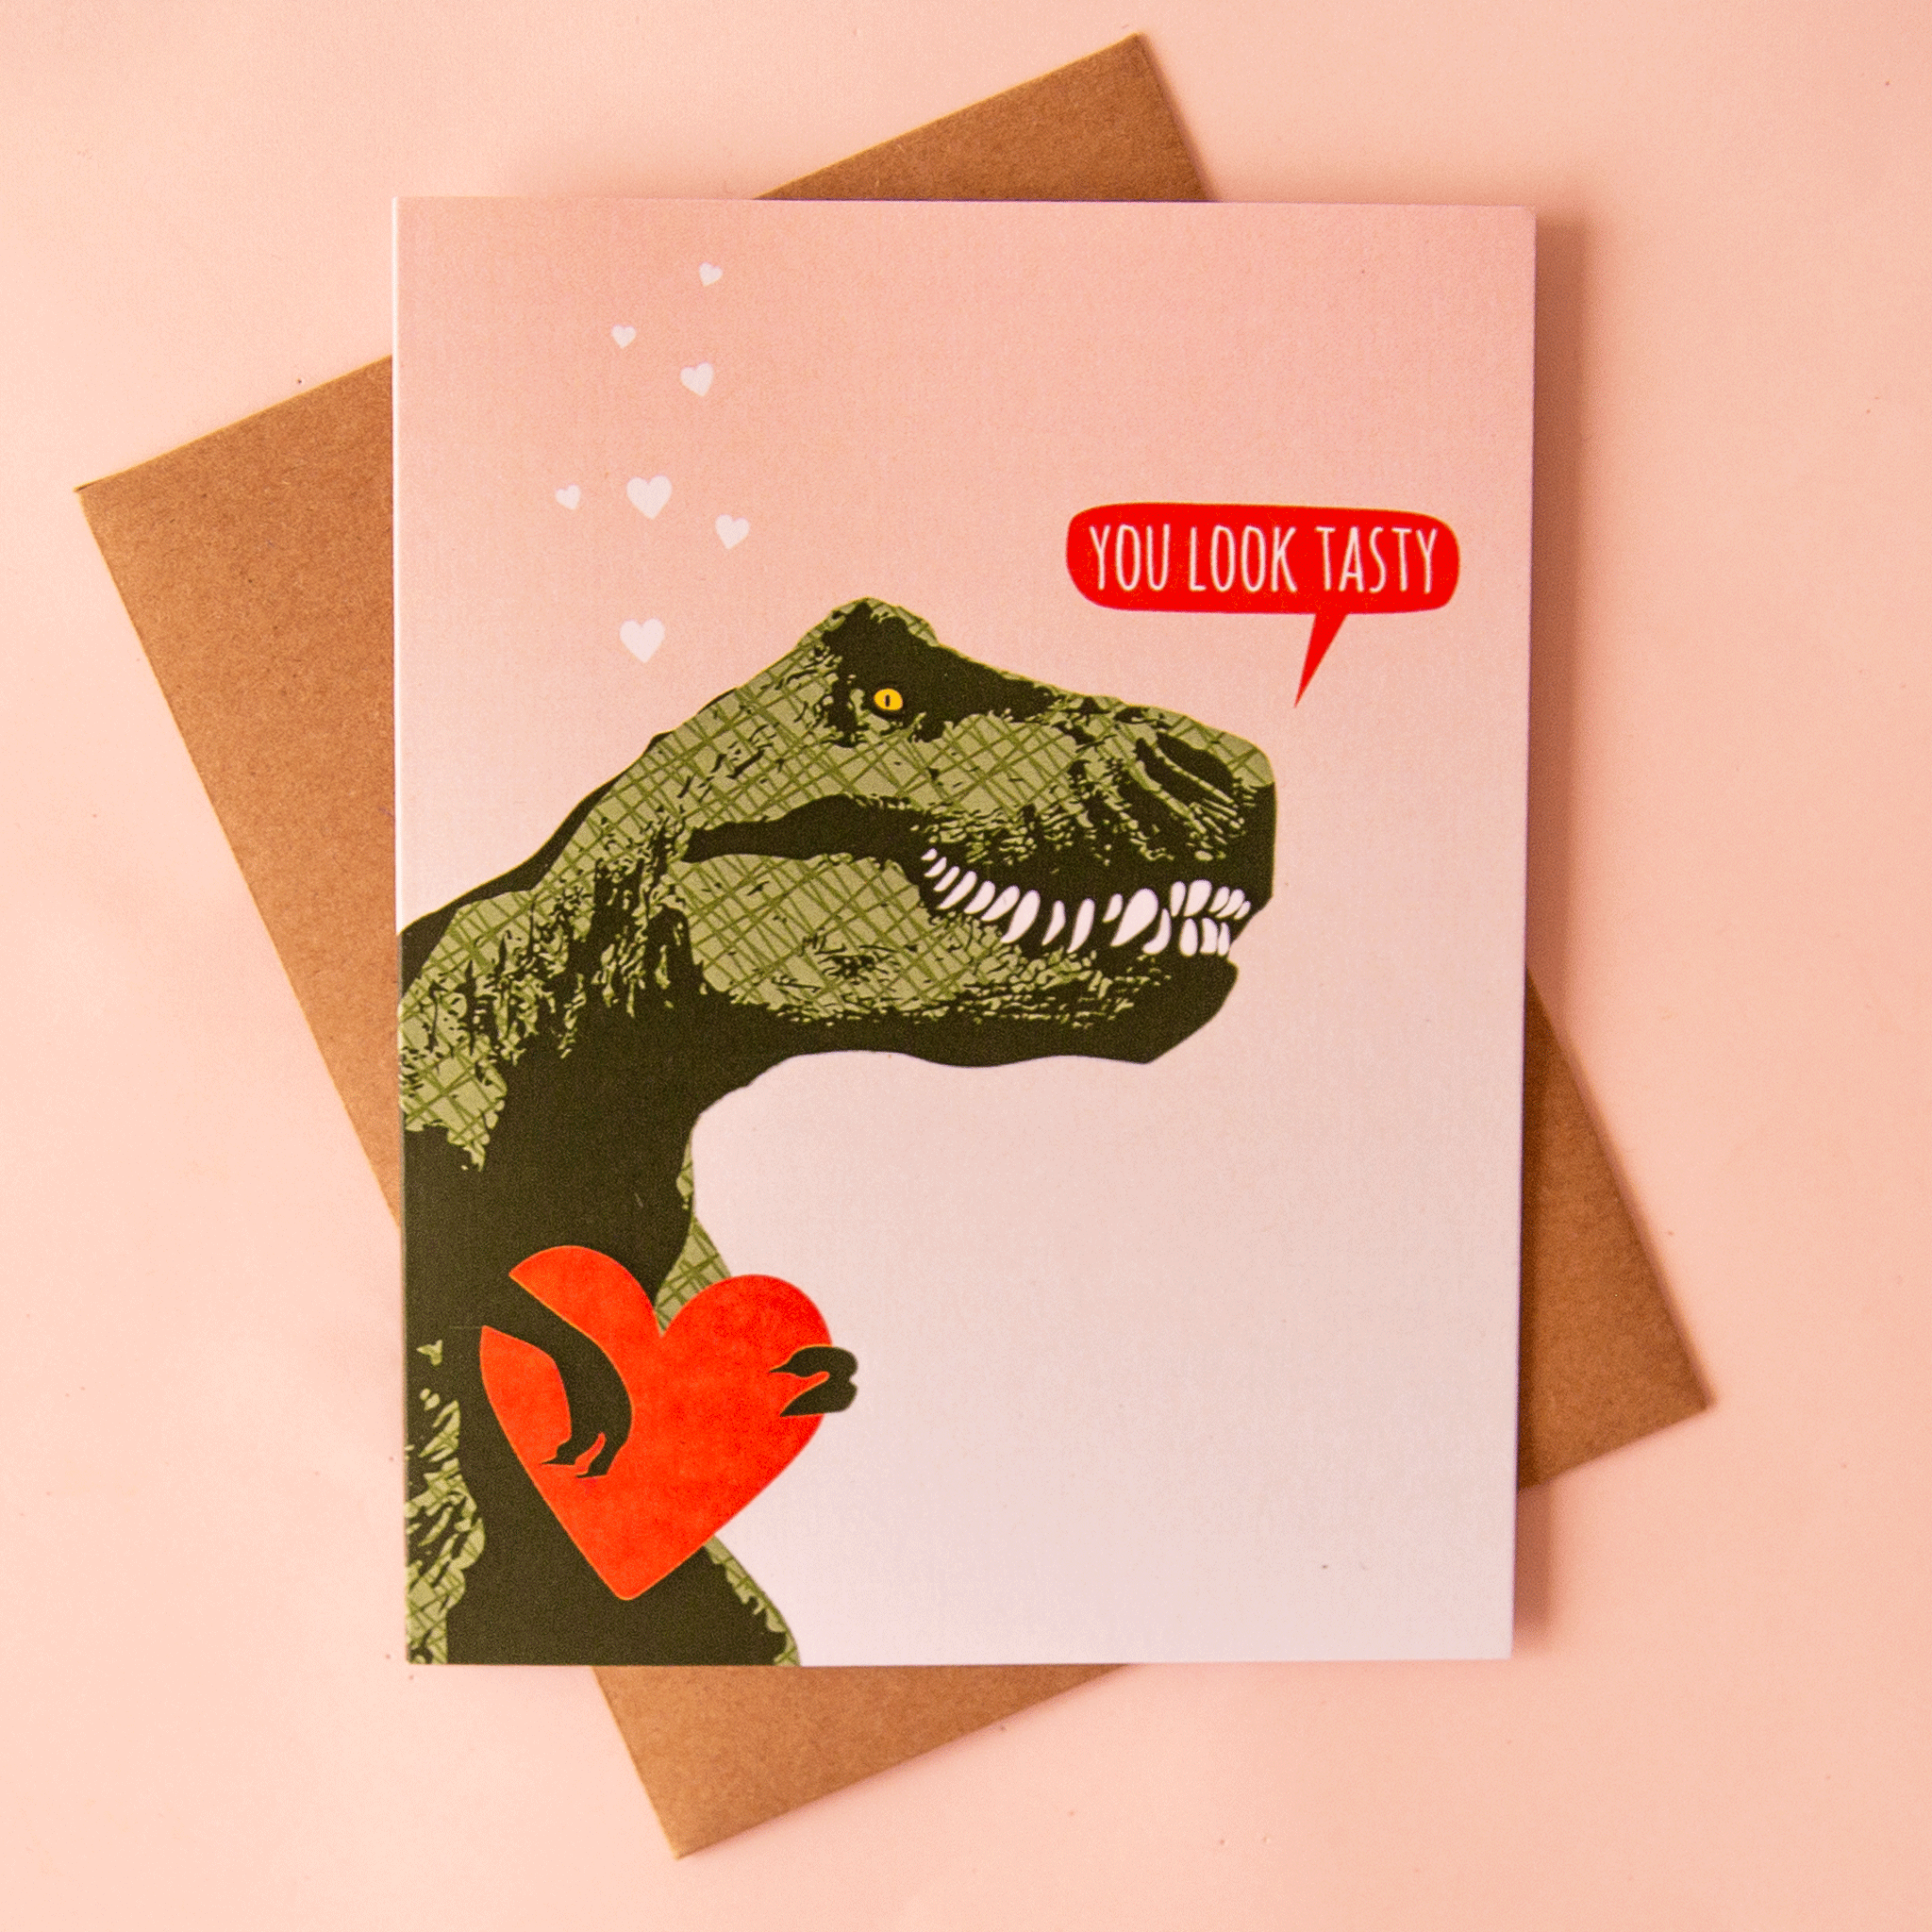 On a pink background is a pink card with a green t-rex illustration that&#39;s holding a heart and a speech bubble that reads, &quot;You Look Tasty&quot;.